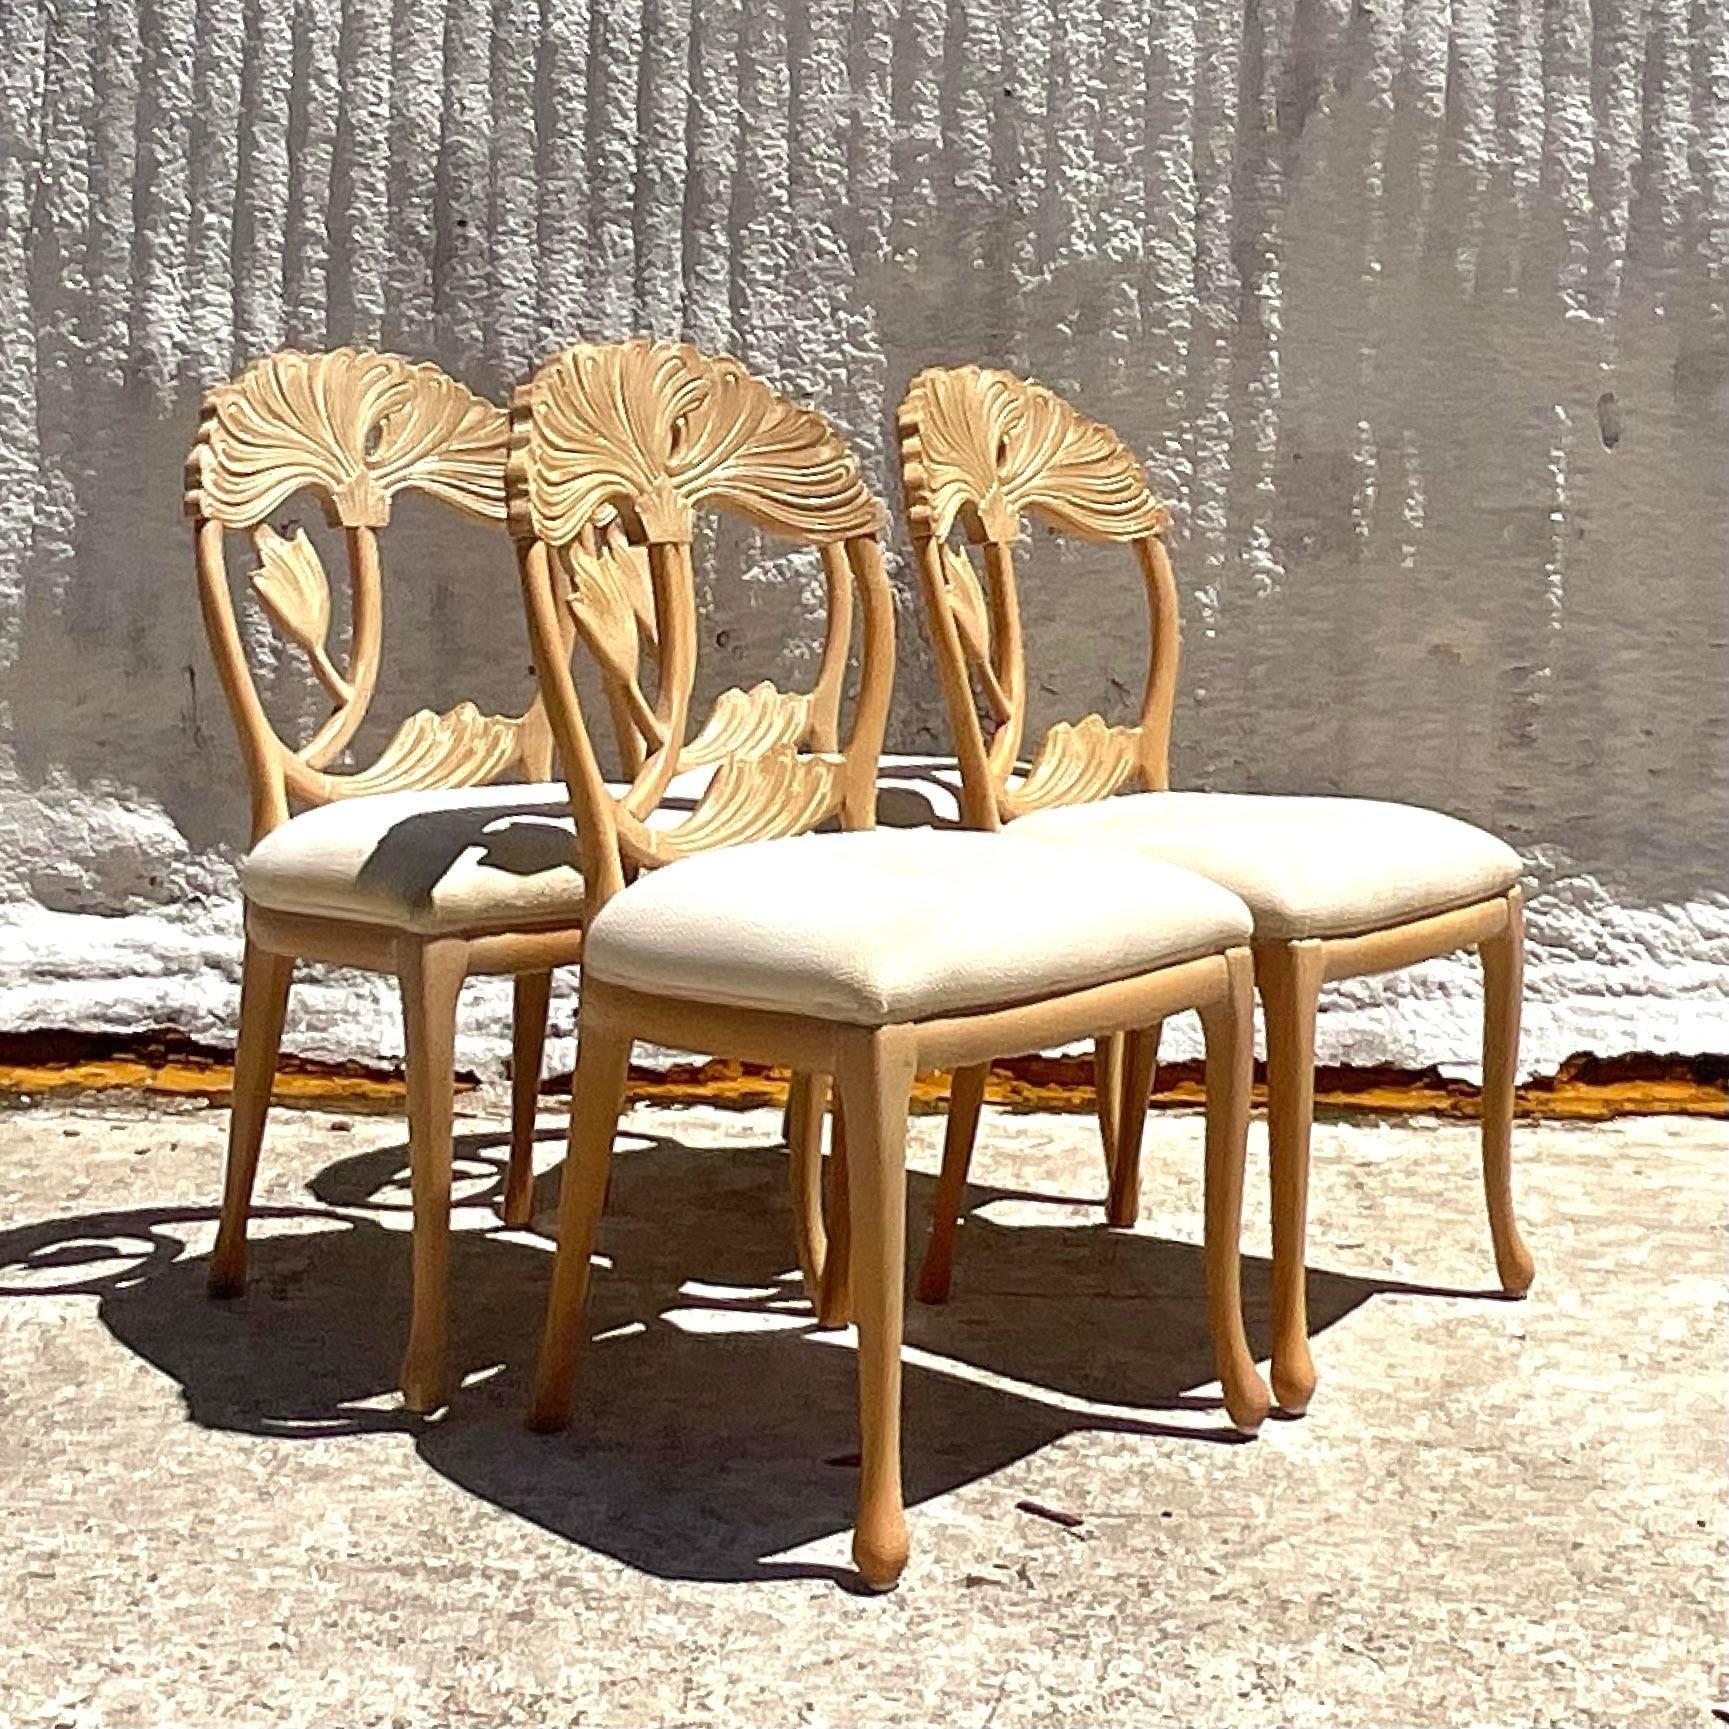 American Vintage Boho Carved Lotus Blossom Dining Chairs - Set of 4 For Sale